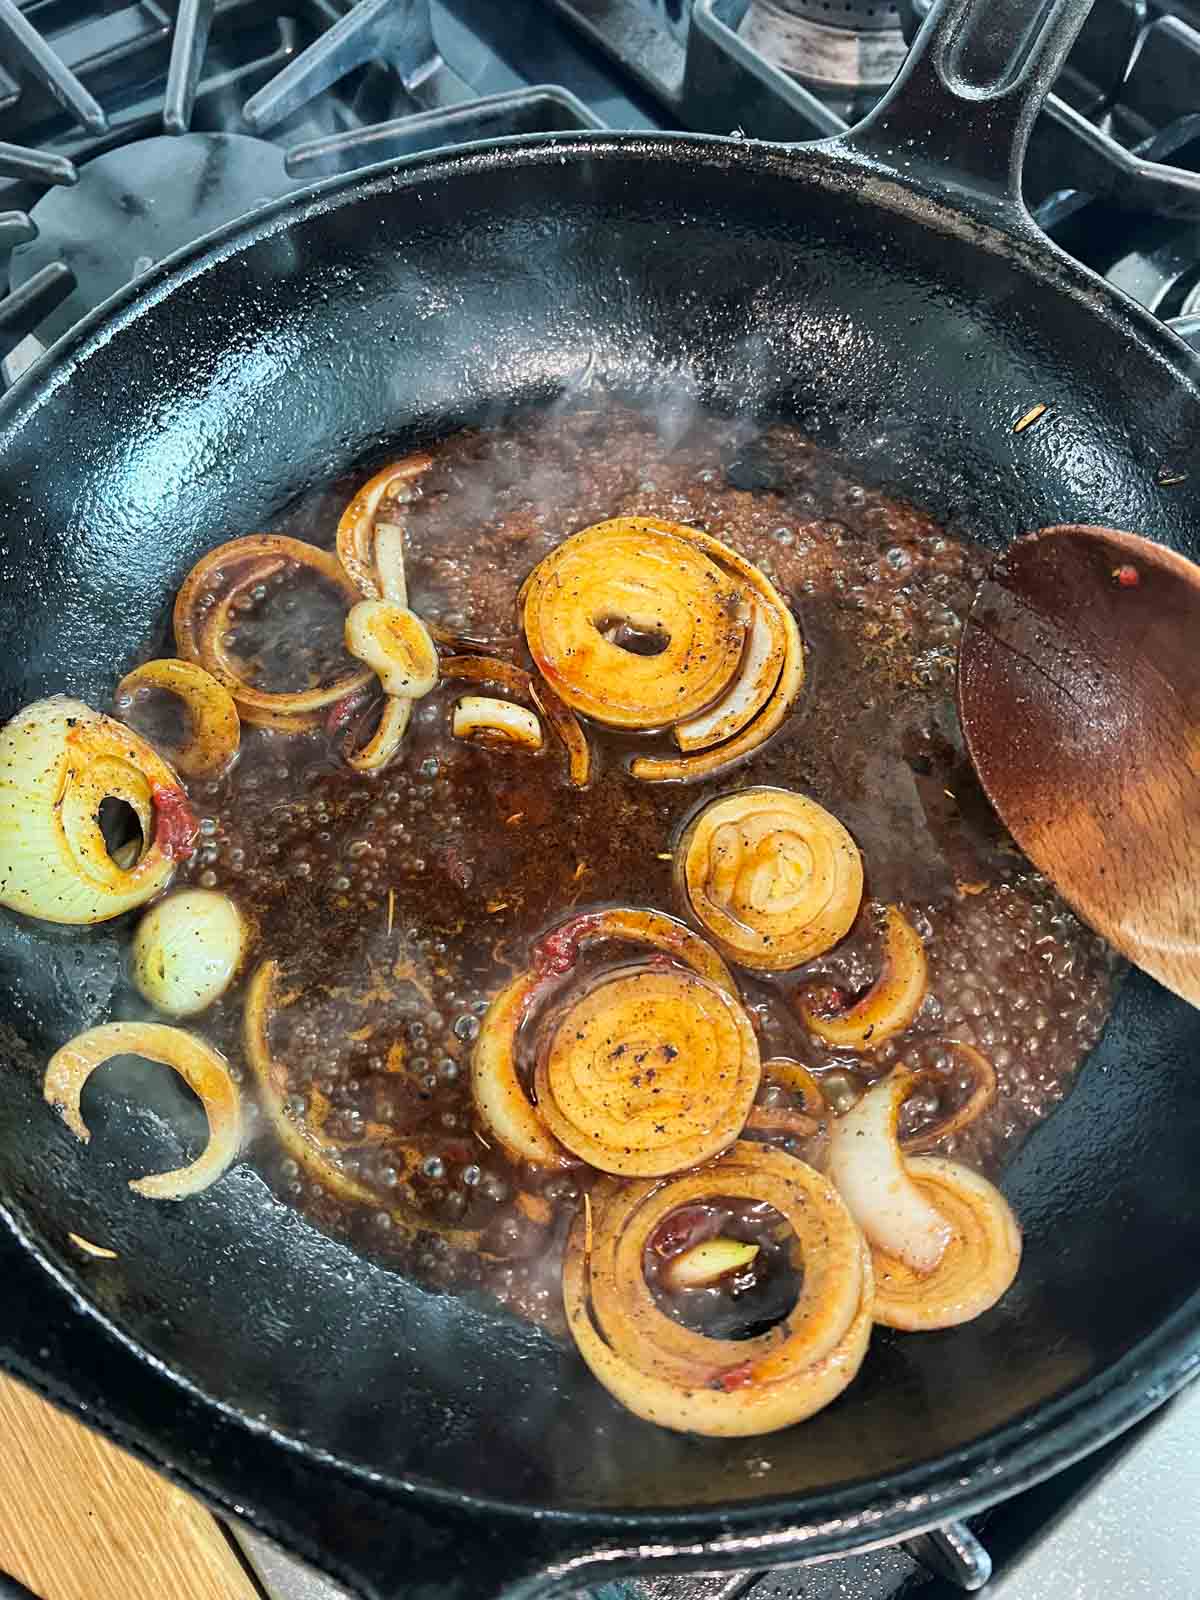 onions and beef broth in a hot cast iron skillet